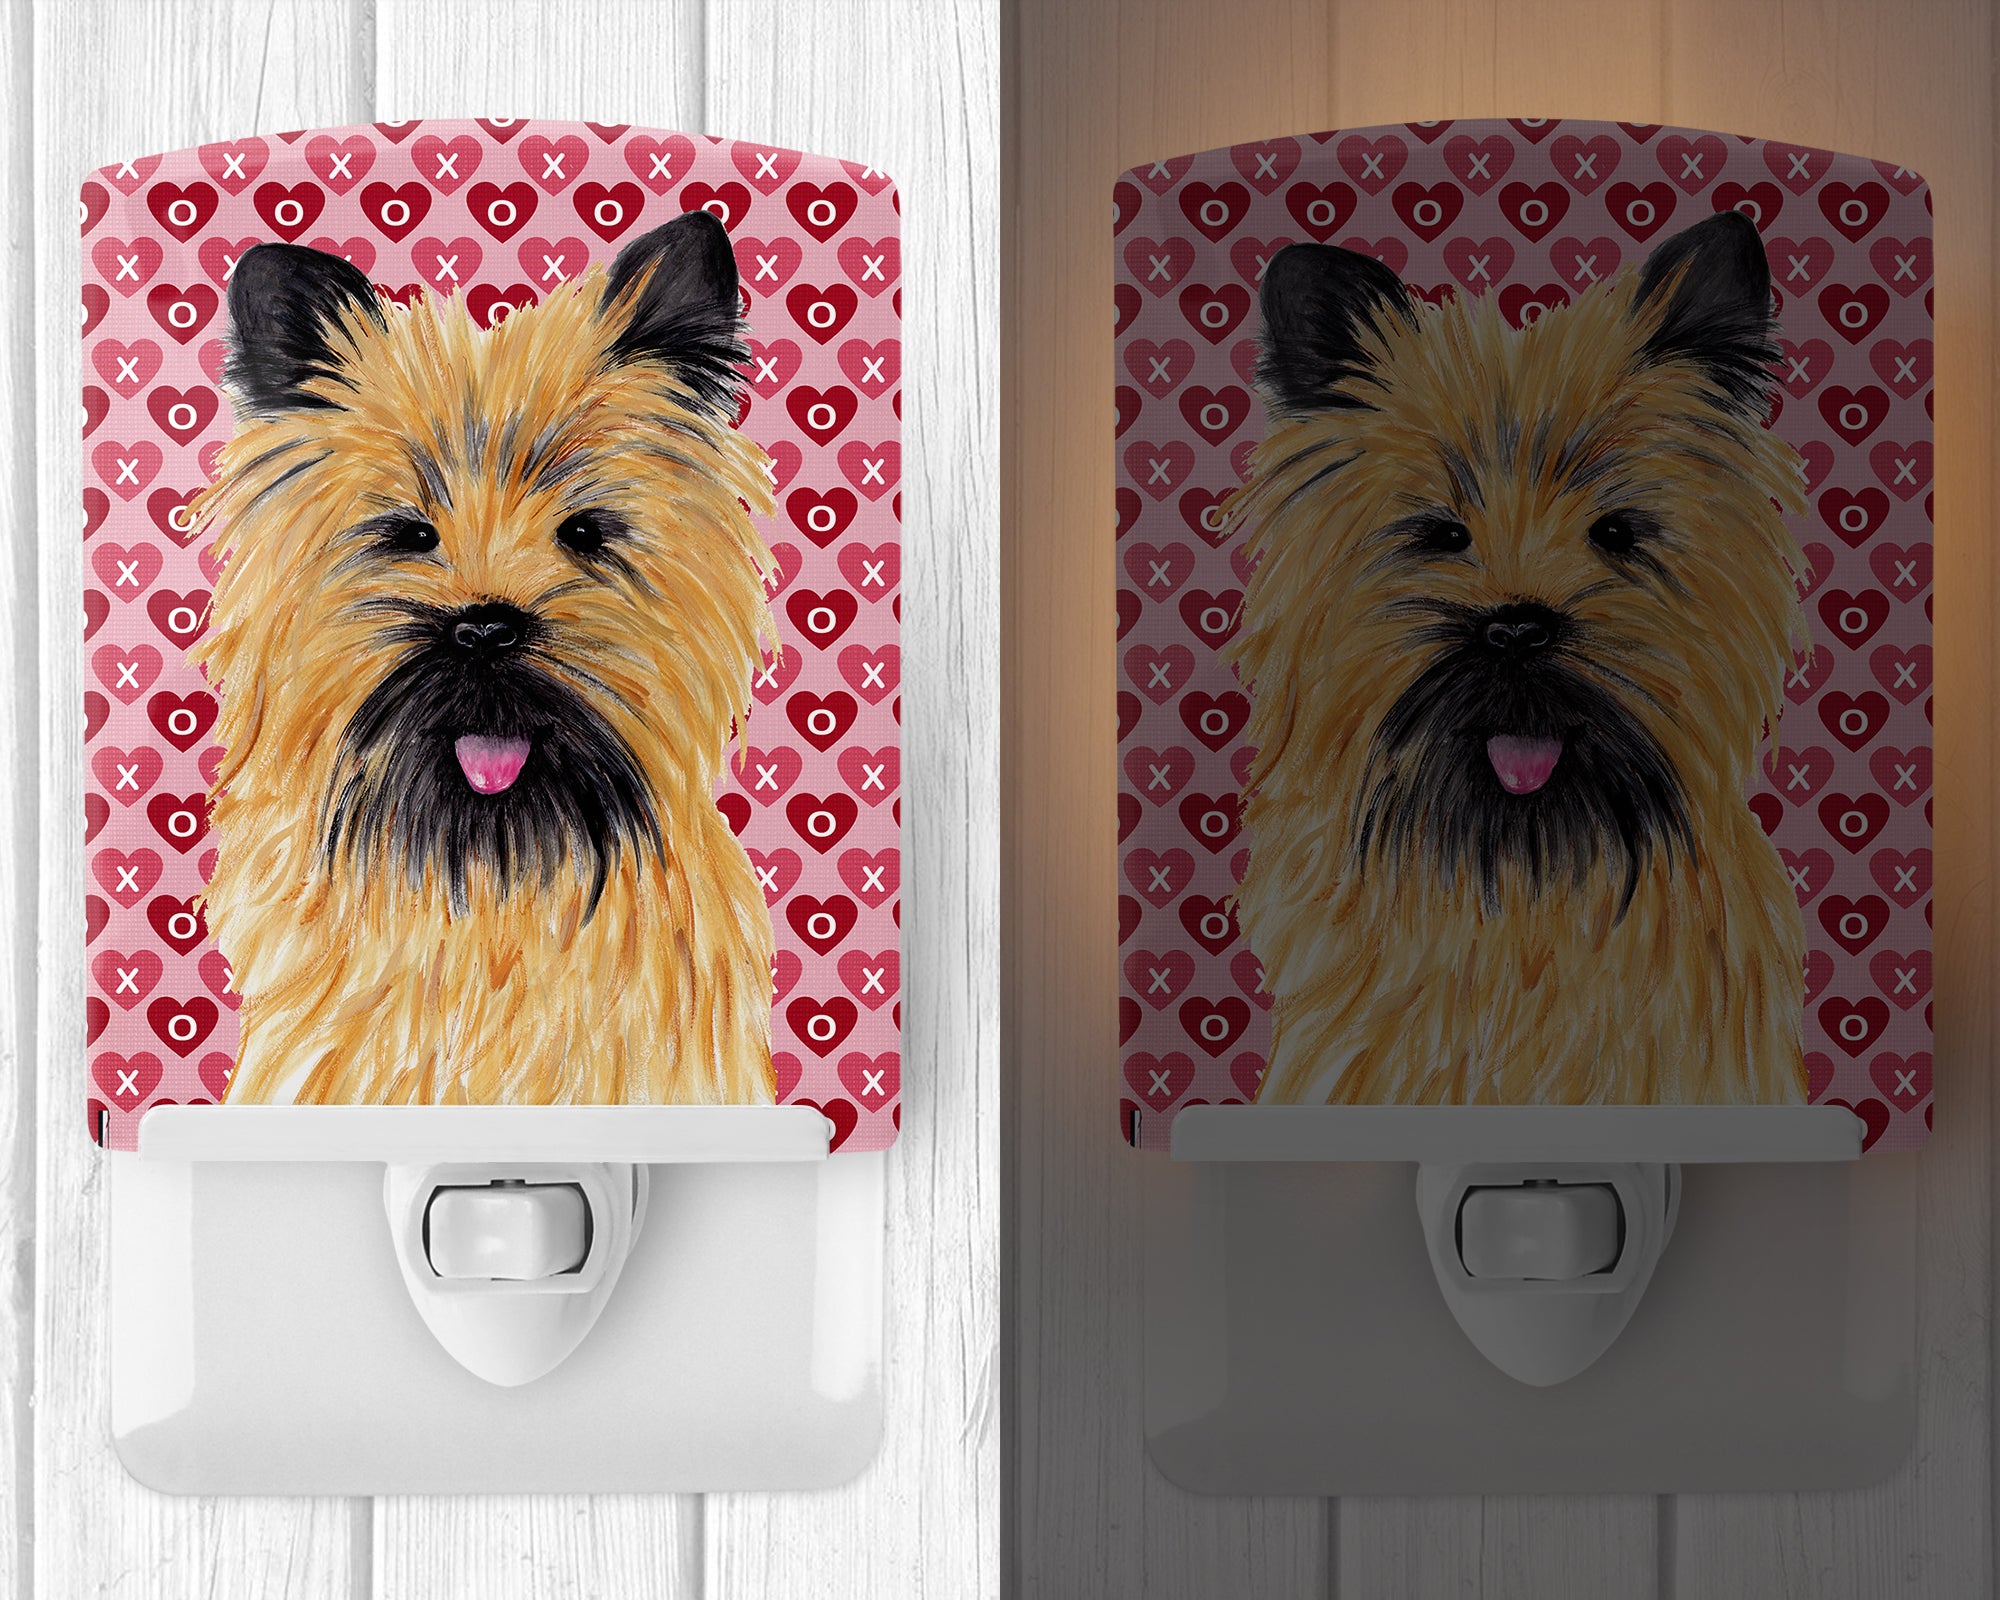 Cairn Terrier Hearts Love and Valentine's Day Portrait Ceramic Night Light SC9264CNL - the-store.com